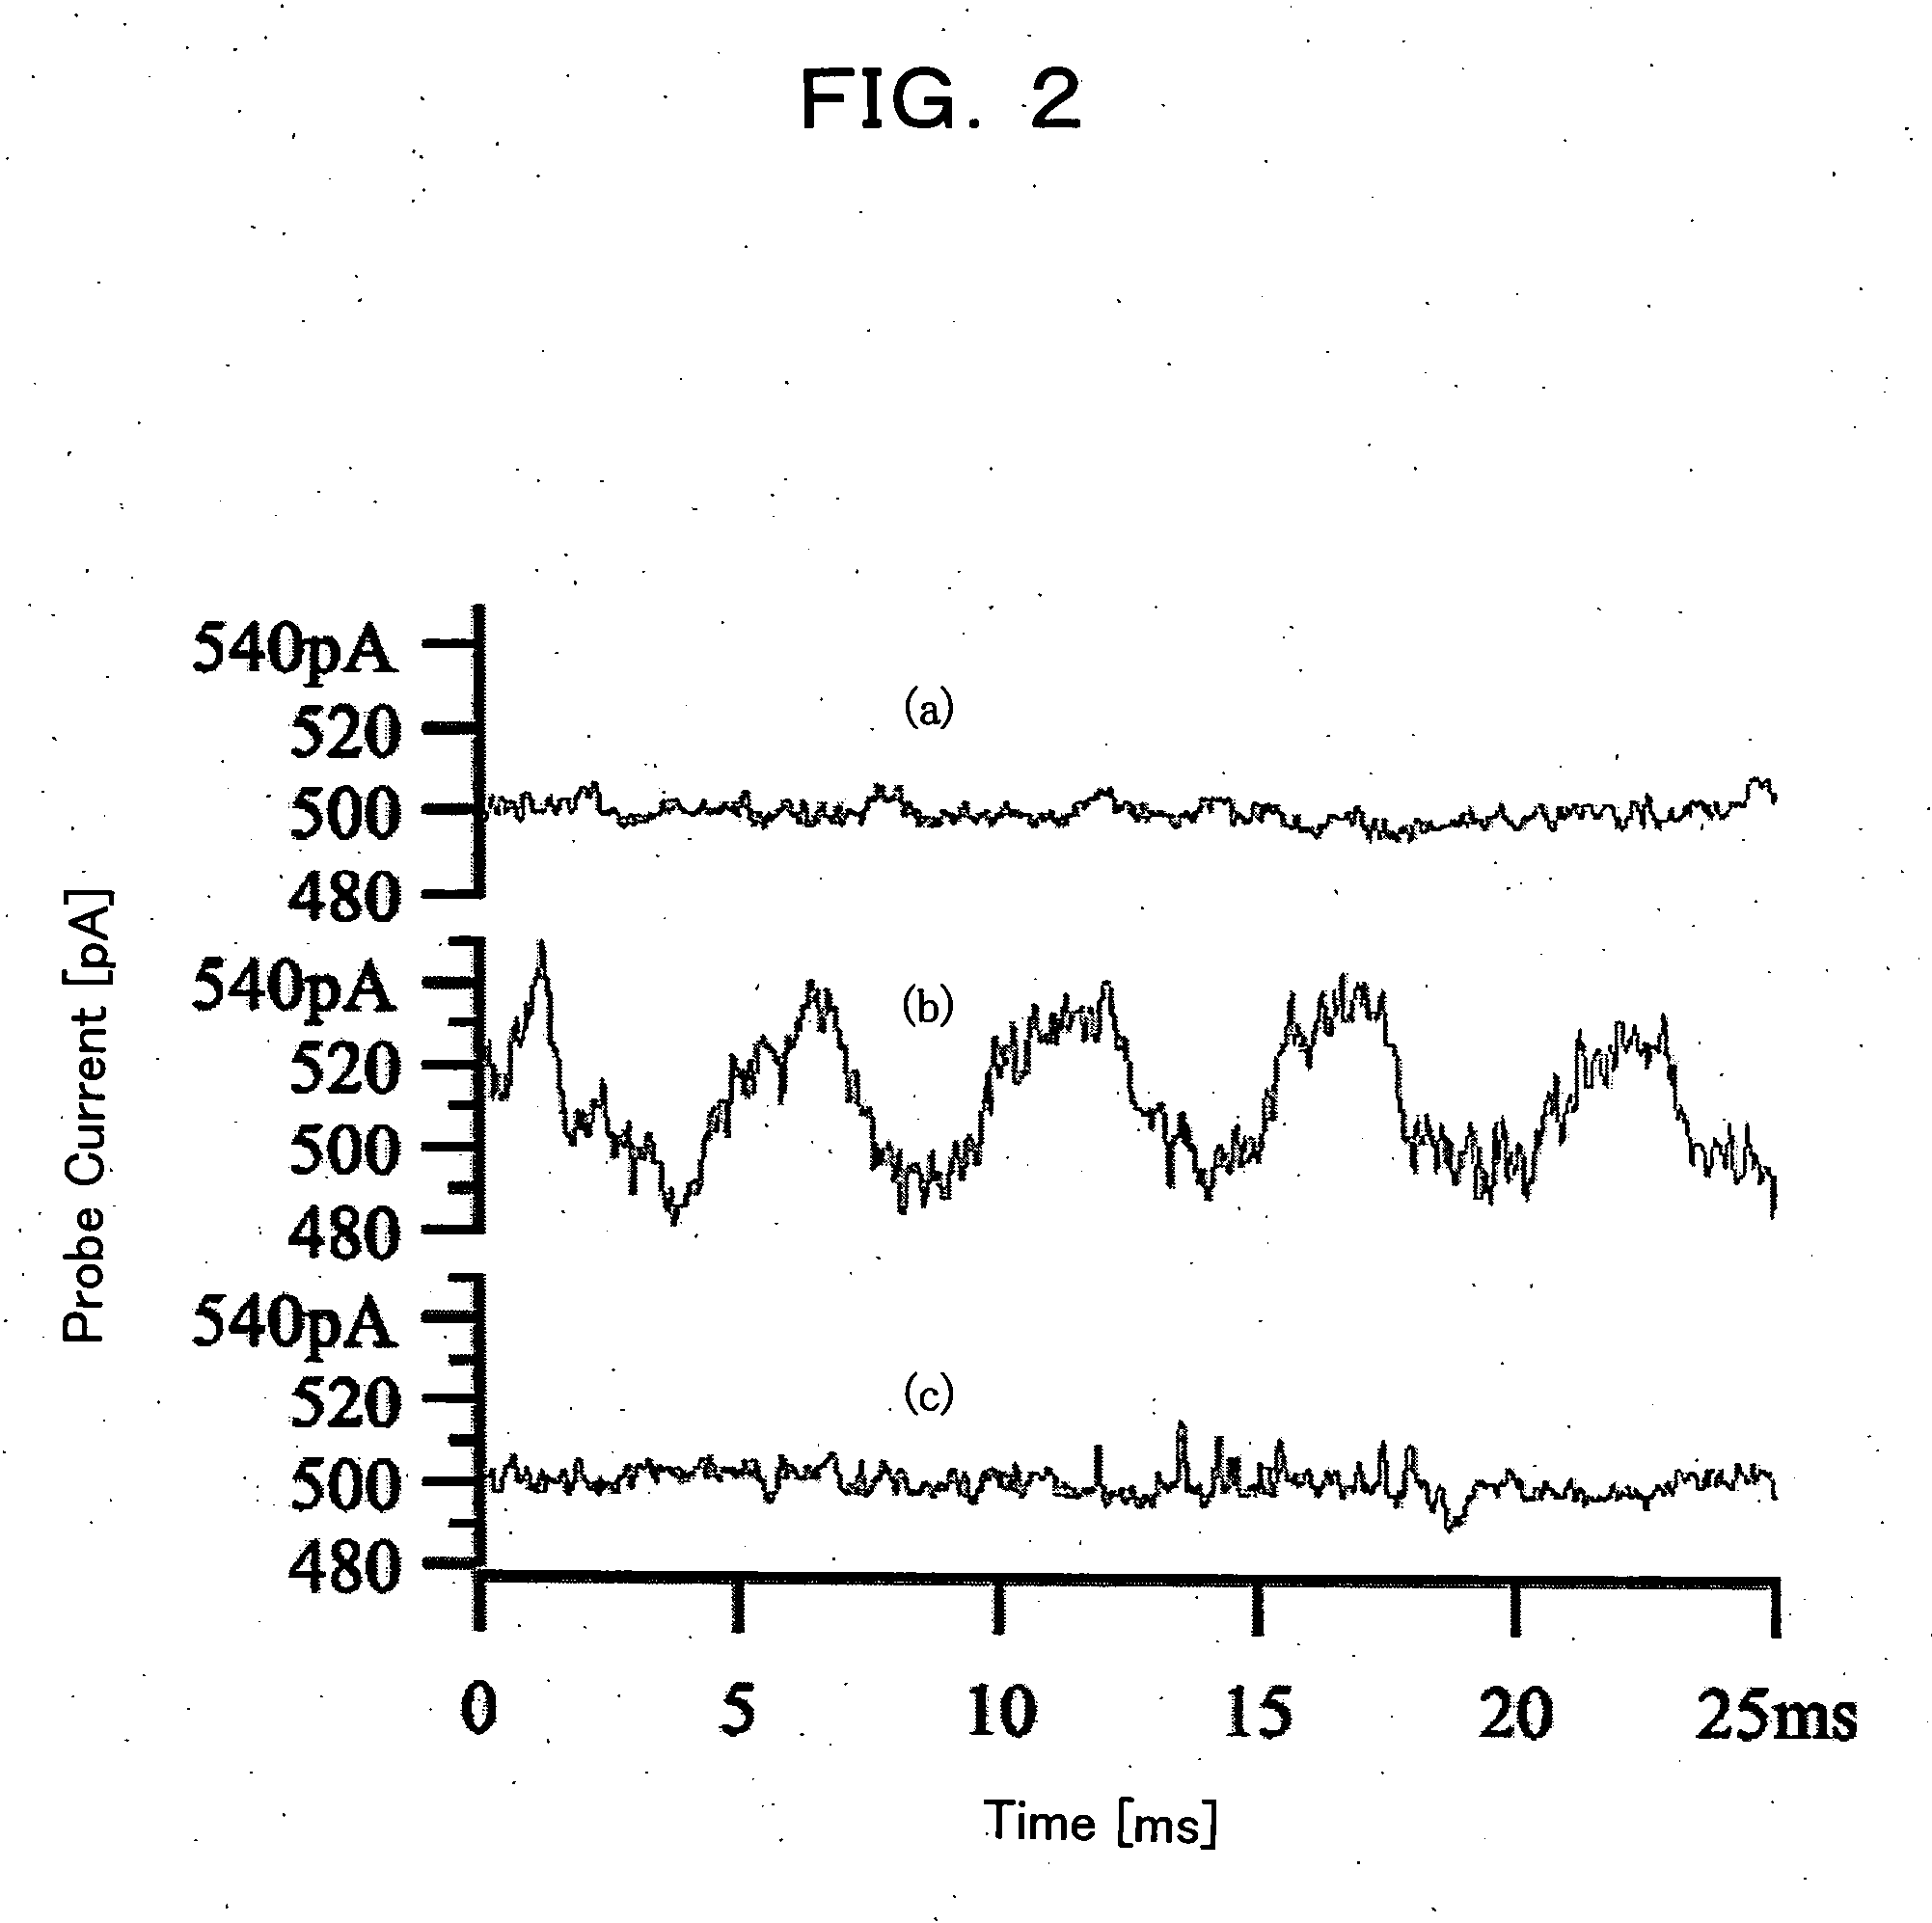 Delay time modulation femtosecond time-resolved scanning probe microscope apparatus